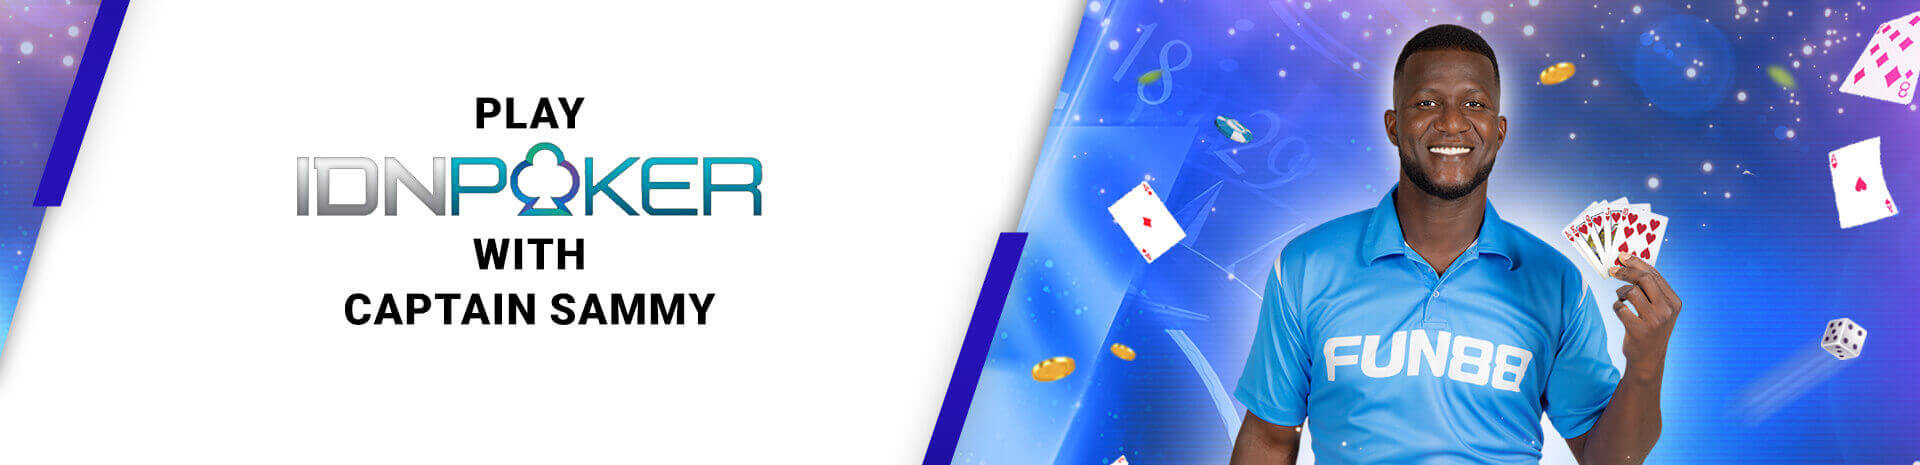 Play Poker Games Online